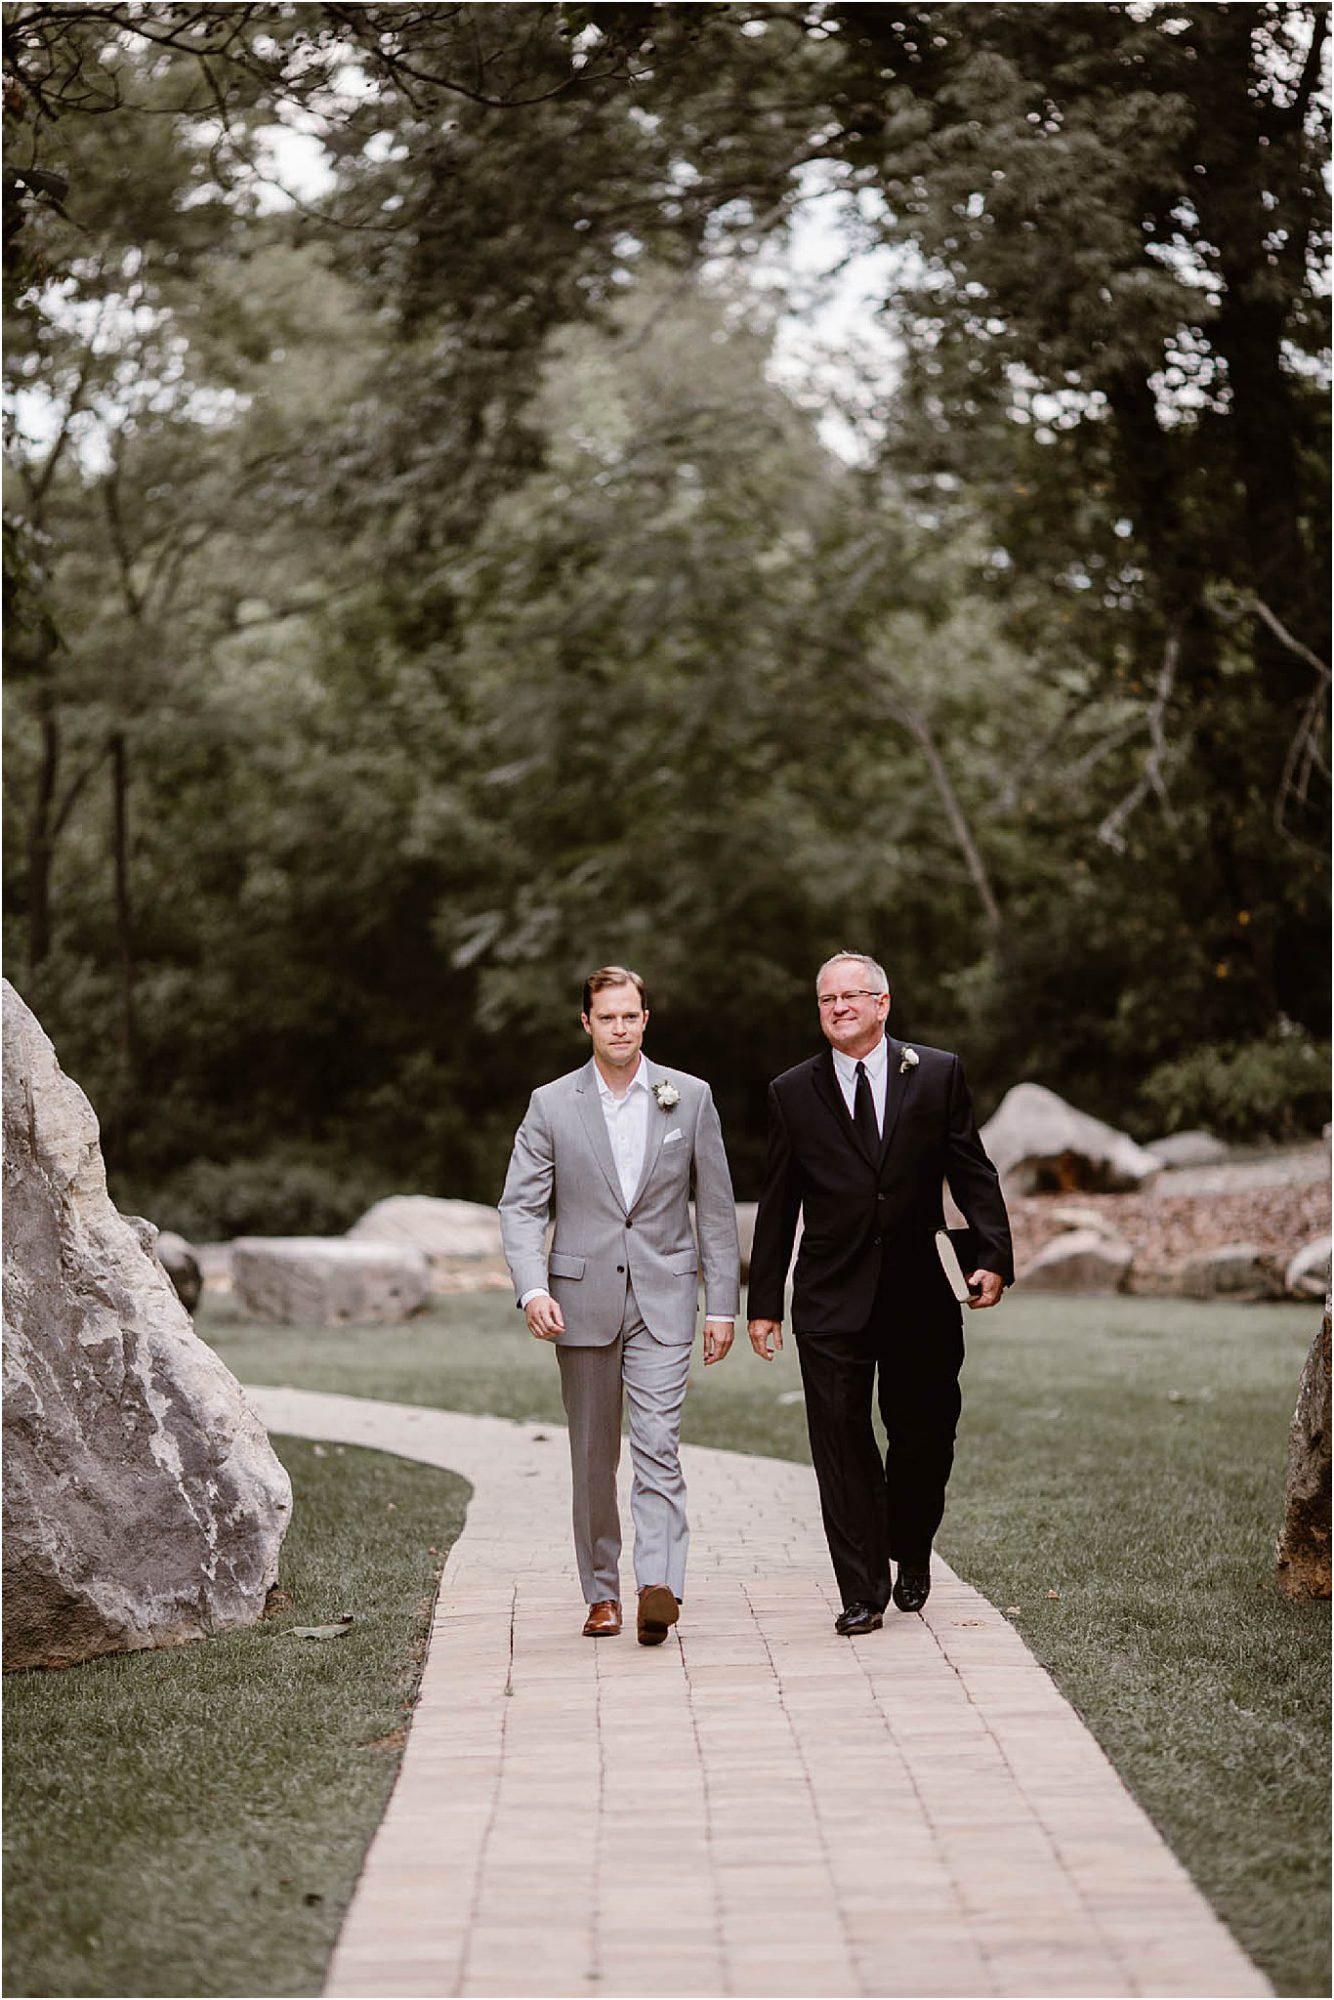 groom and officiant walking down pathway